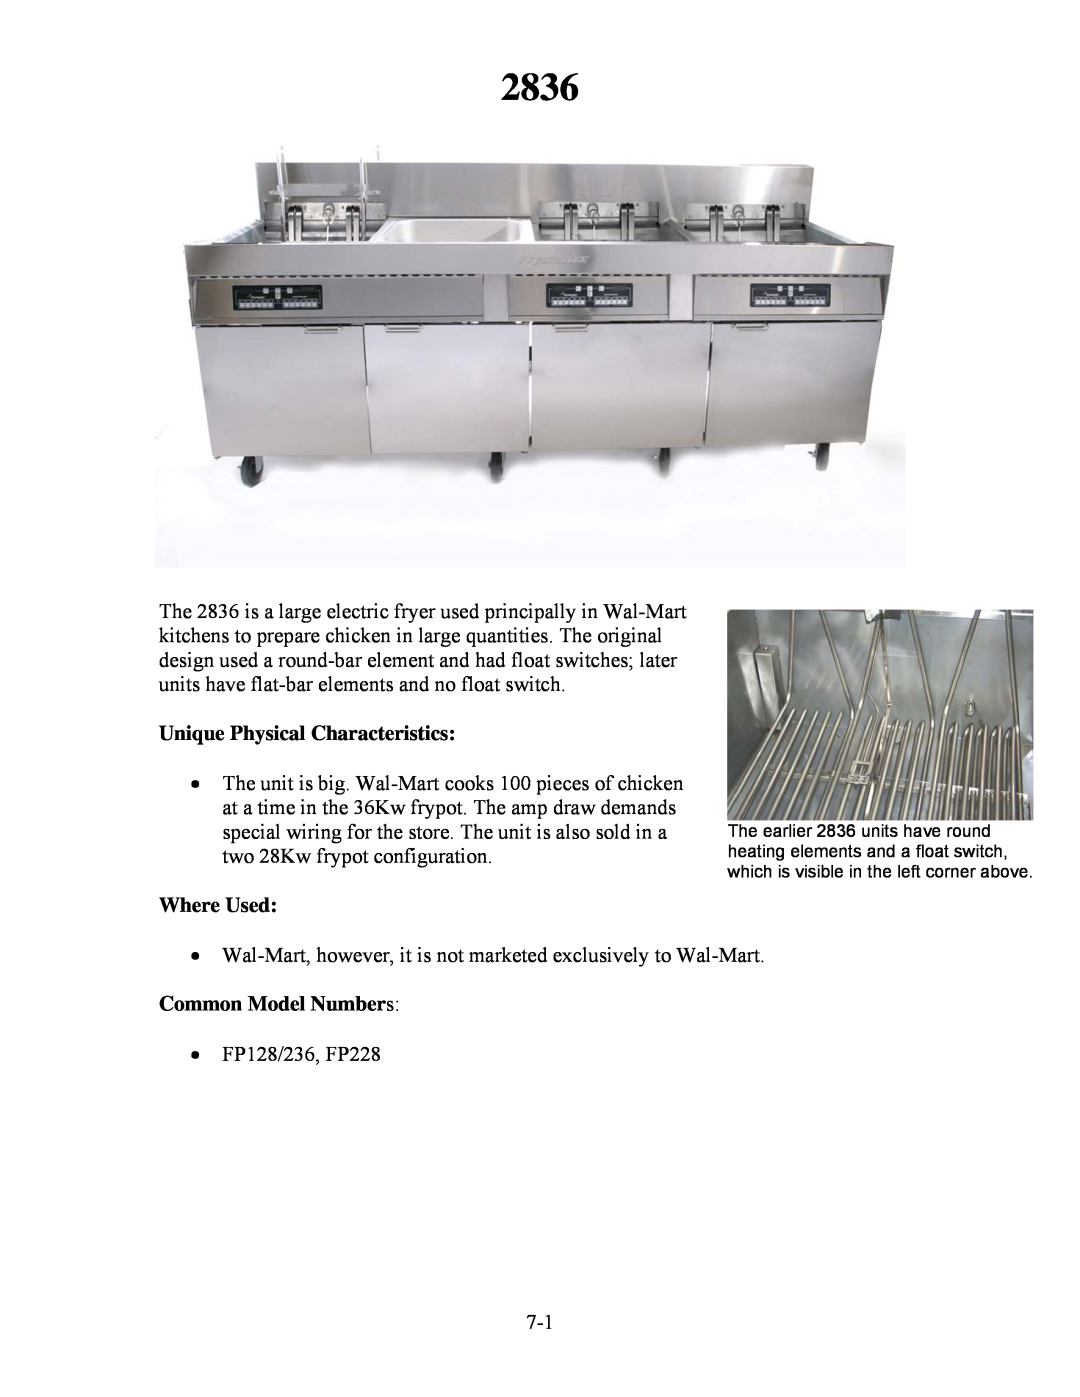 Frymaster H55 manual 2836, Wal-Mart, however, it is not marketed exclusively to Wal-Mart, Unique Physical Characteristics 